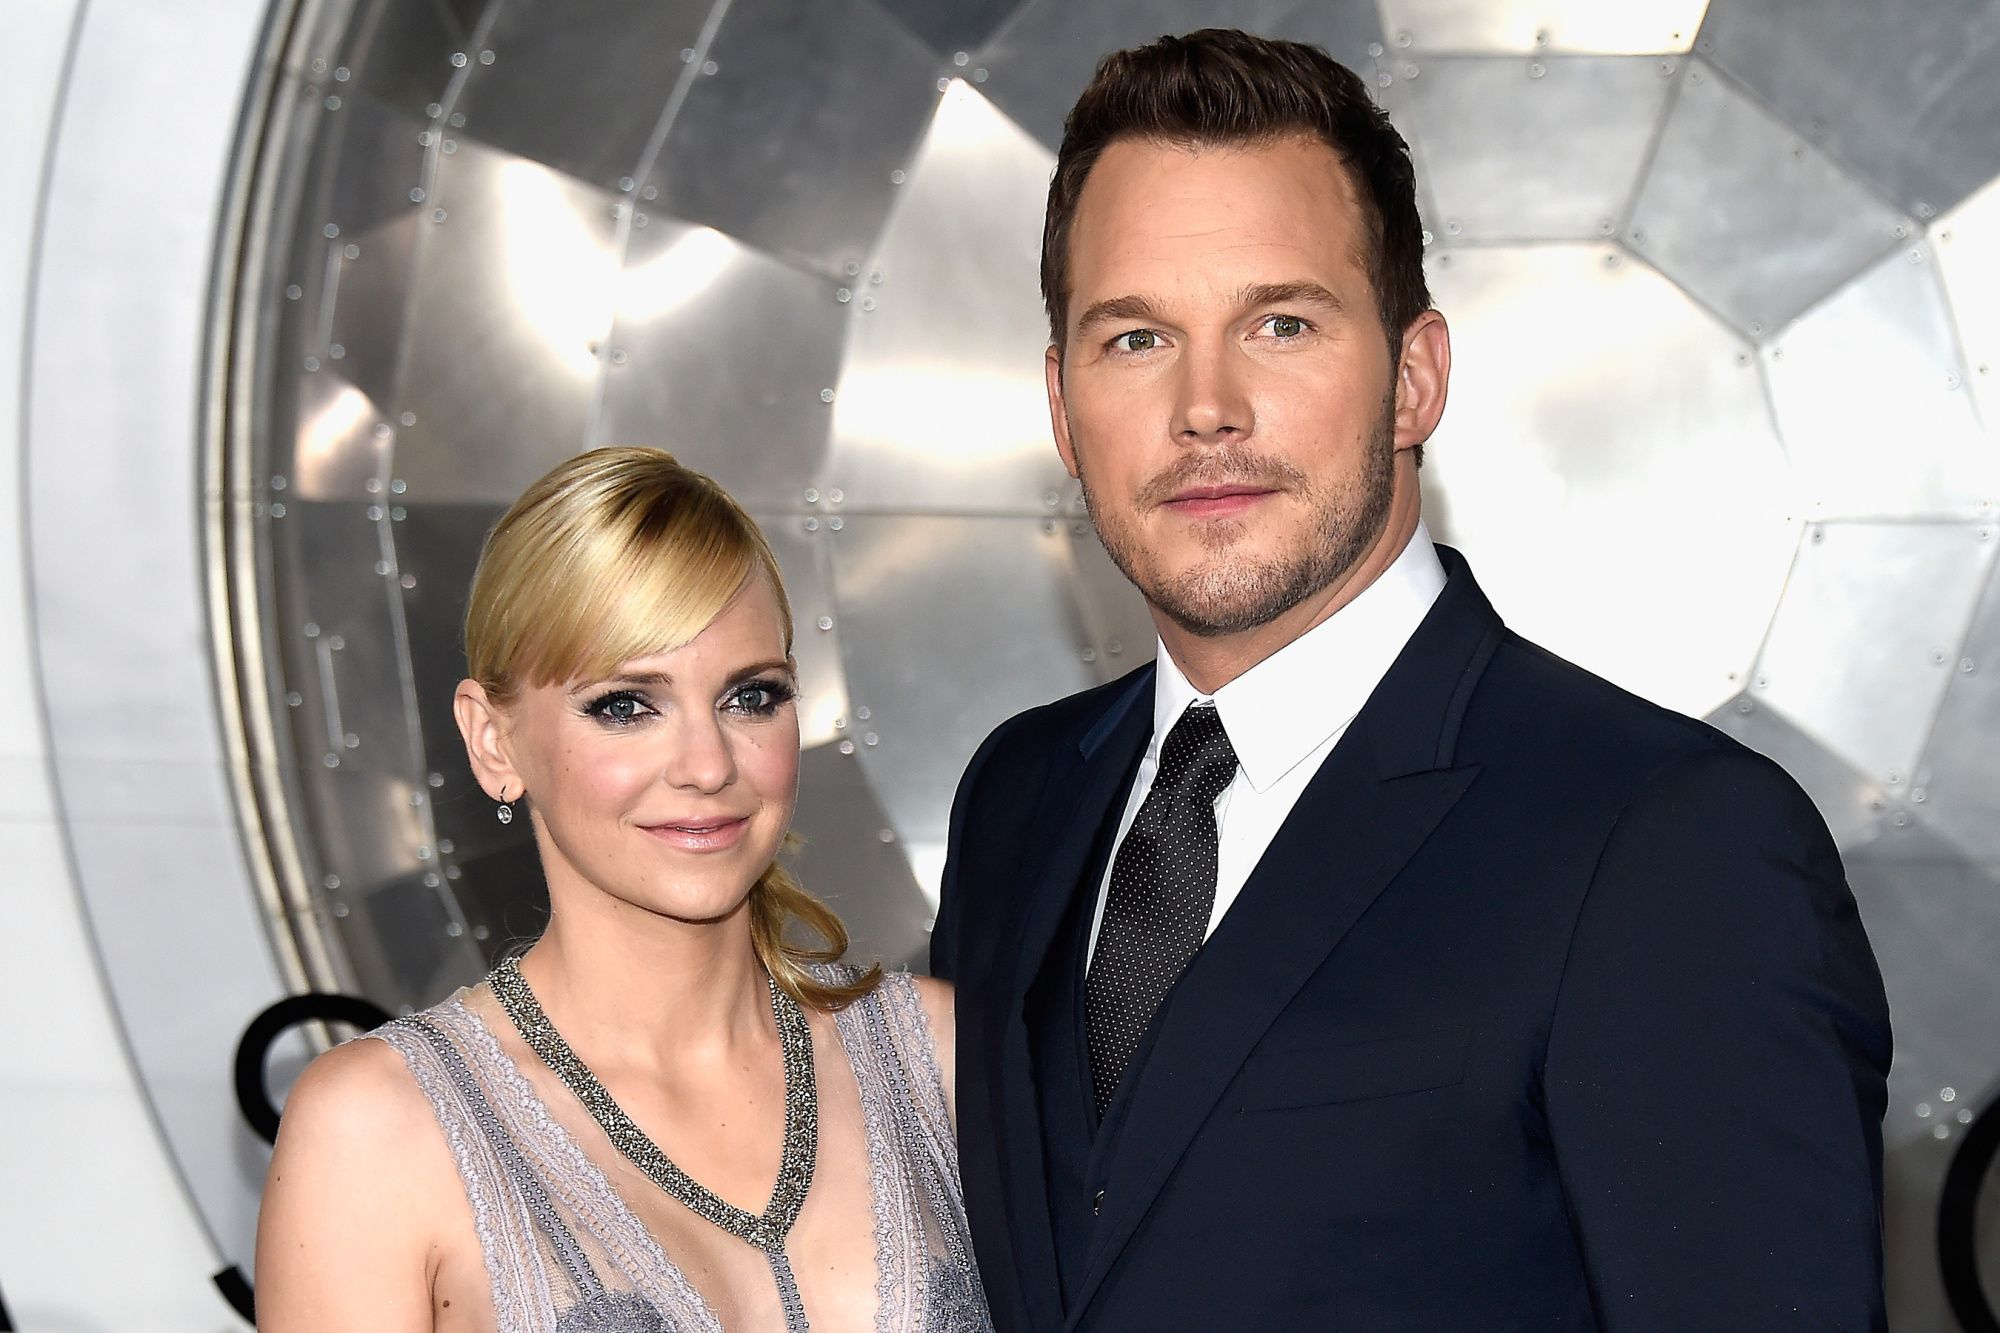  Anna Faris and Chris Pratt at the premiere of "Passengers" in 2016 in California | Source: Getty Images